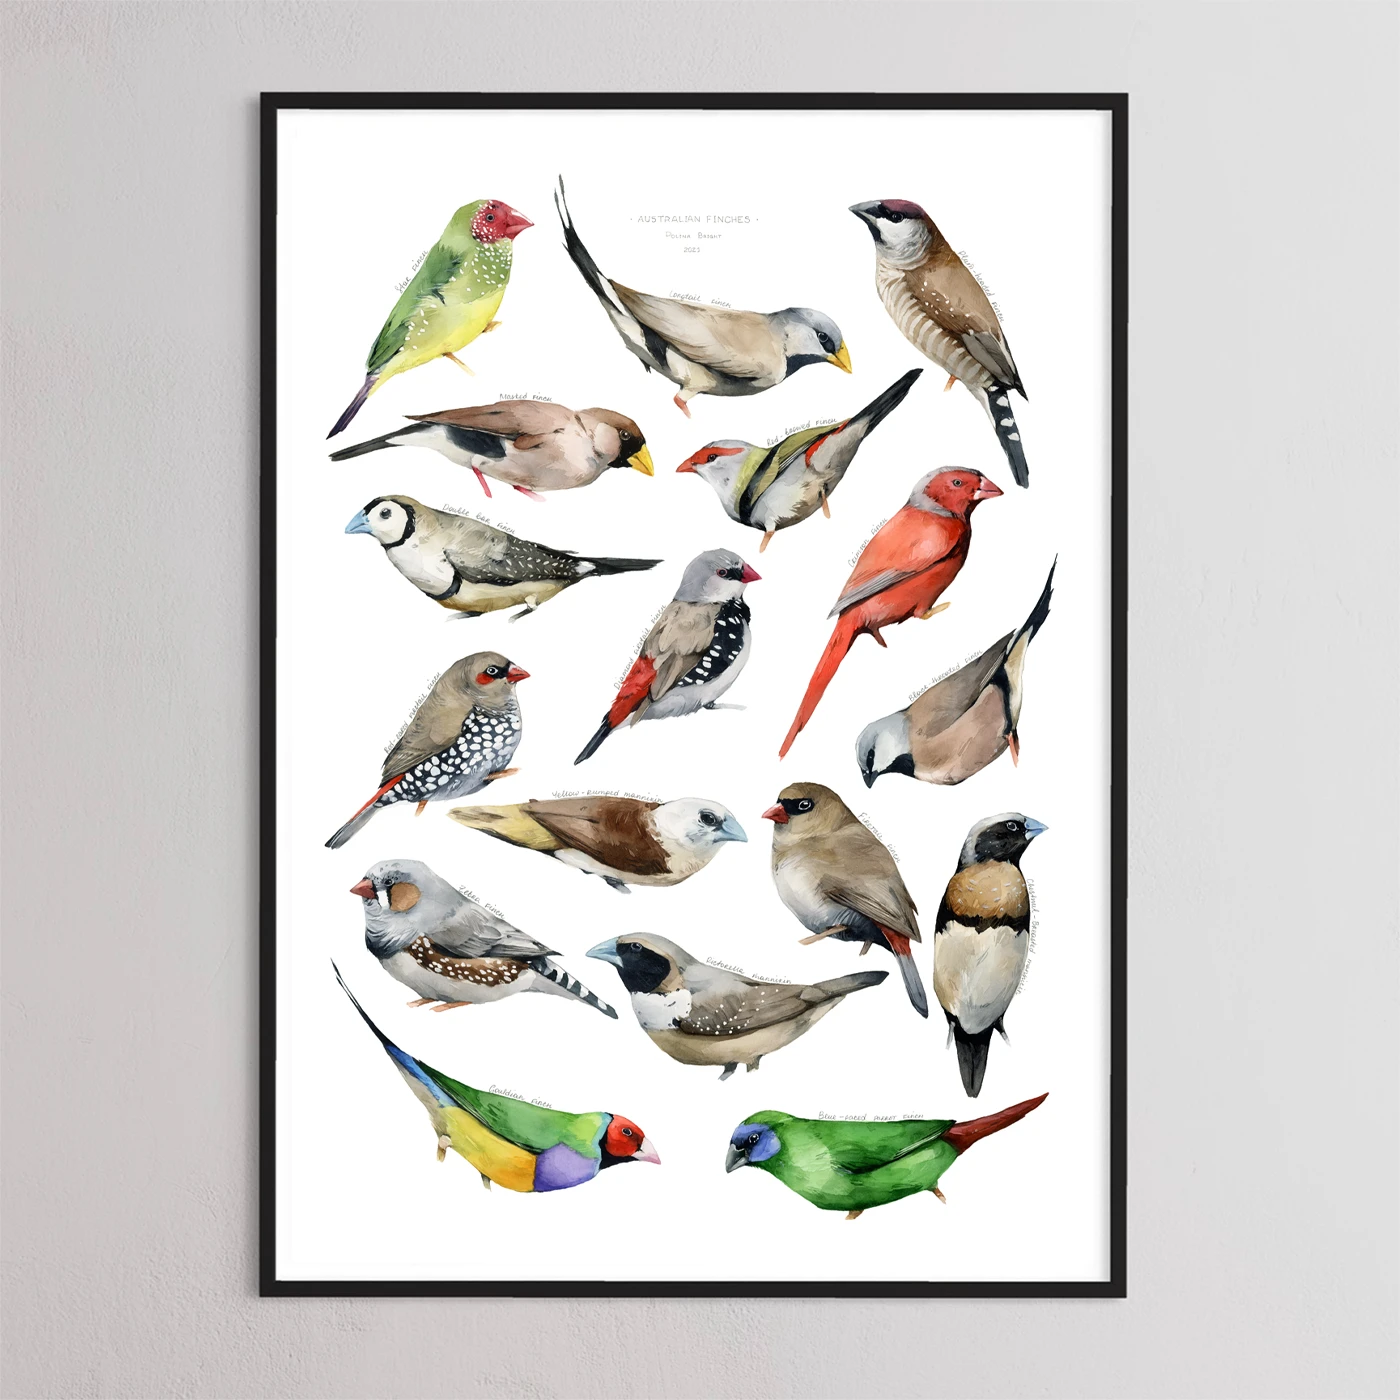 Australian Finches by Polina Bright